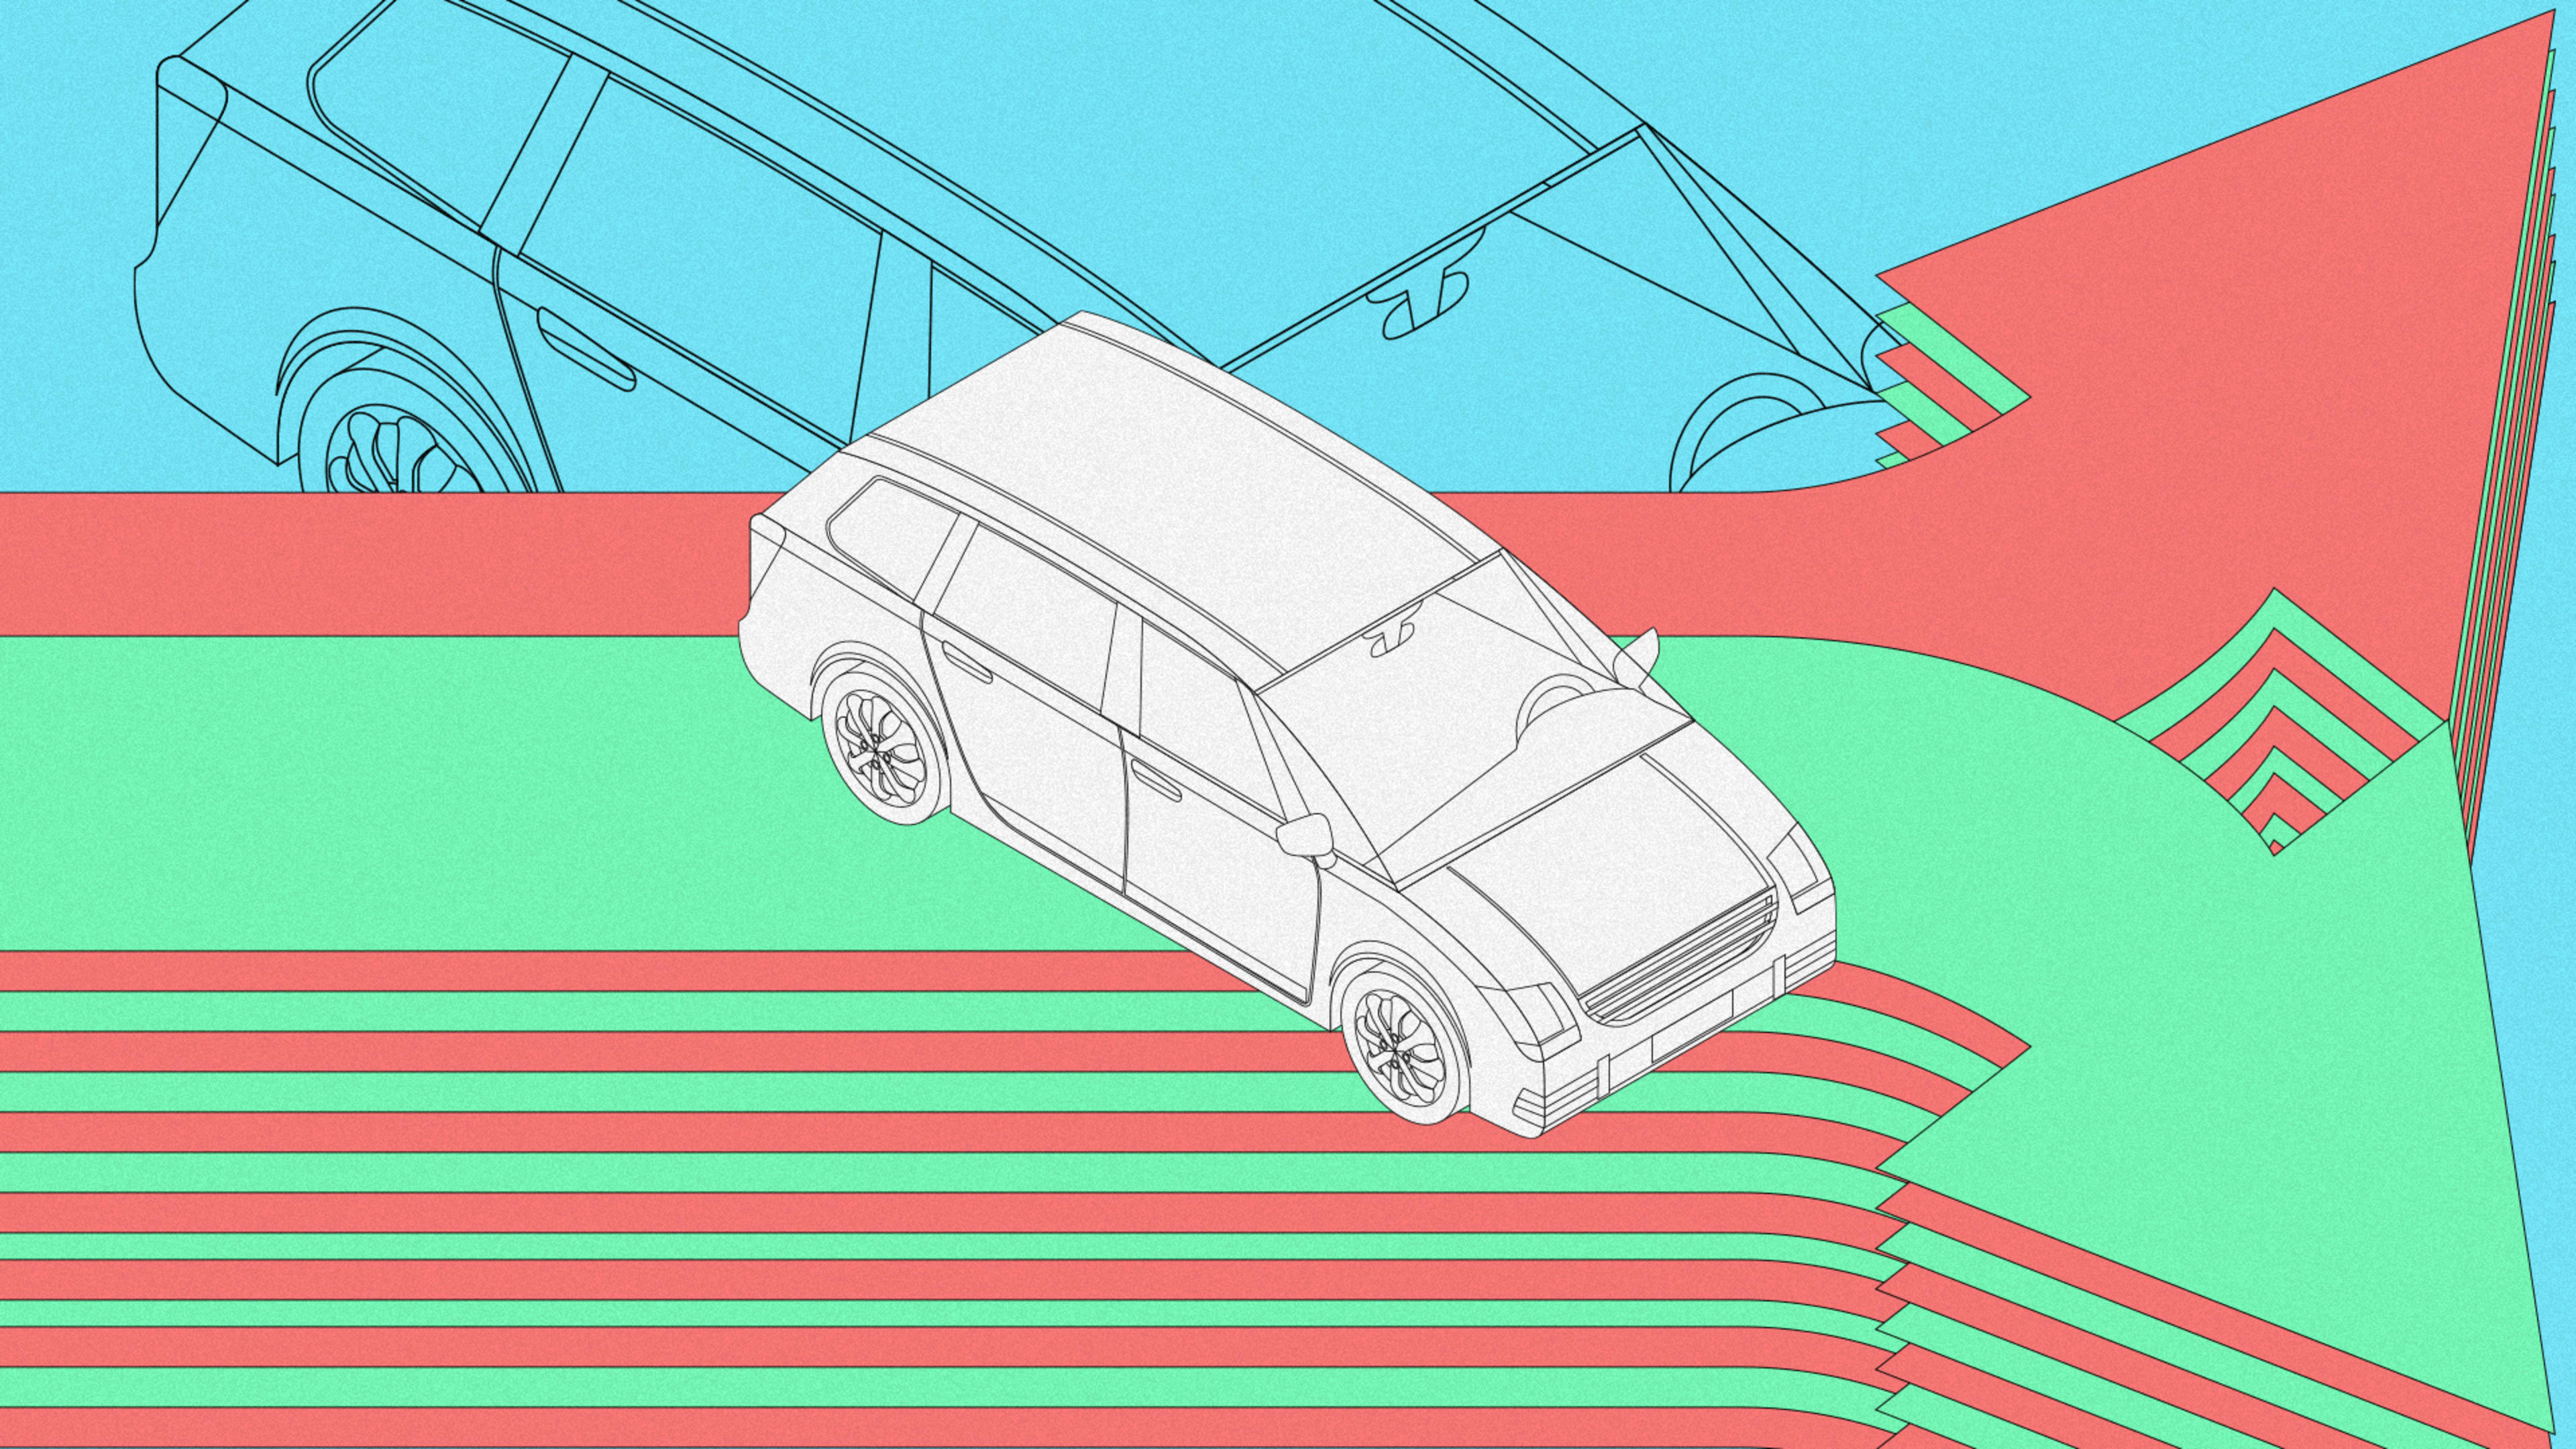 Self-driving cars will never be moral. Let’s stop pretending otherwise